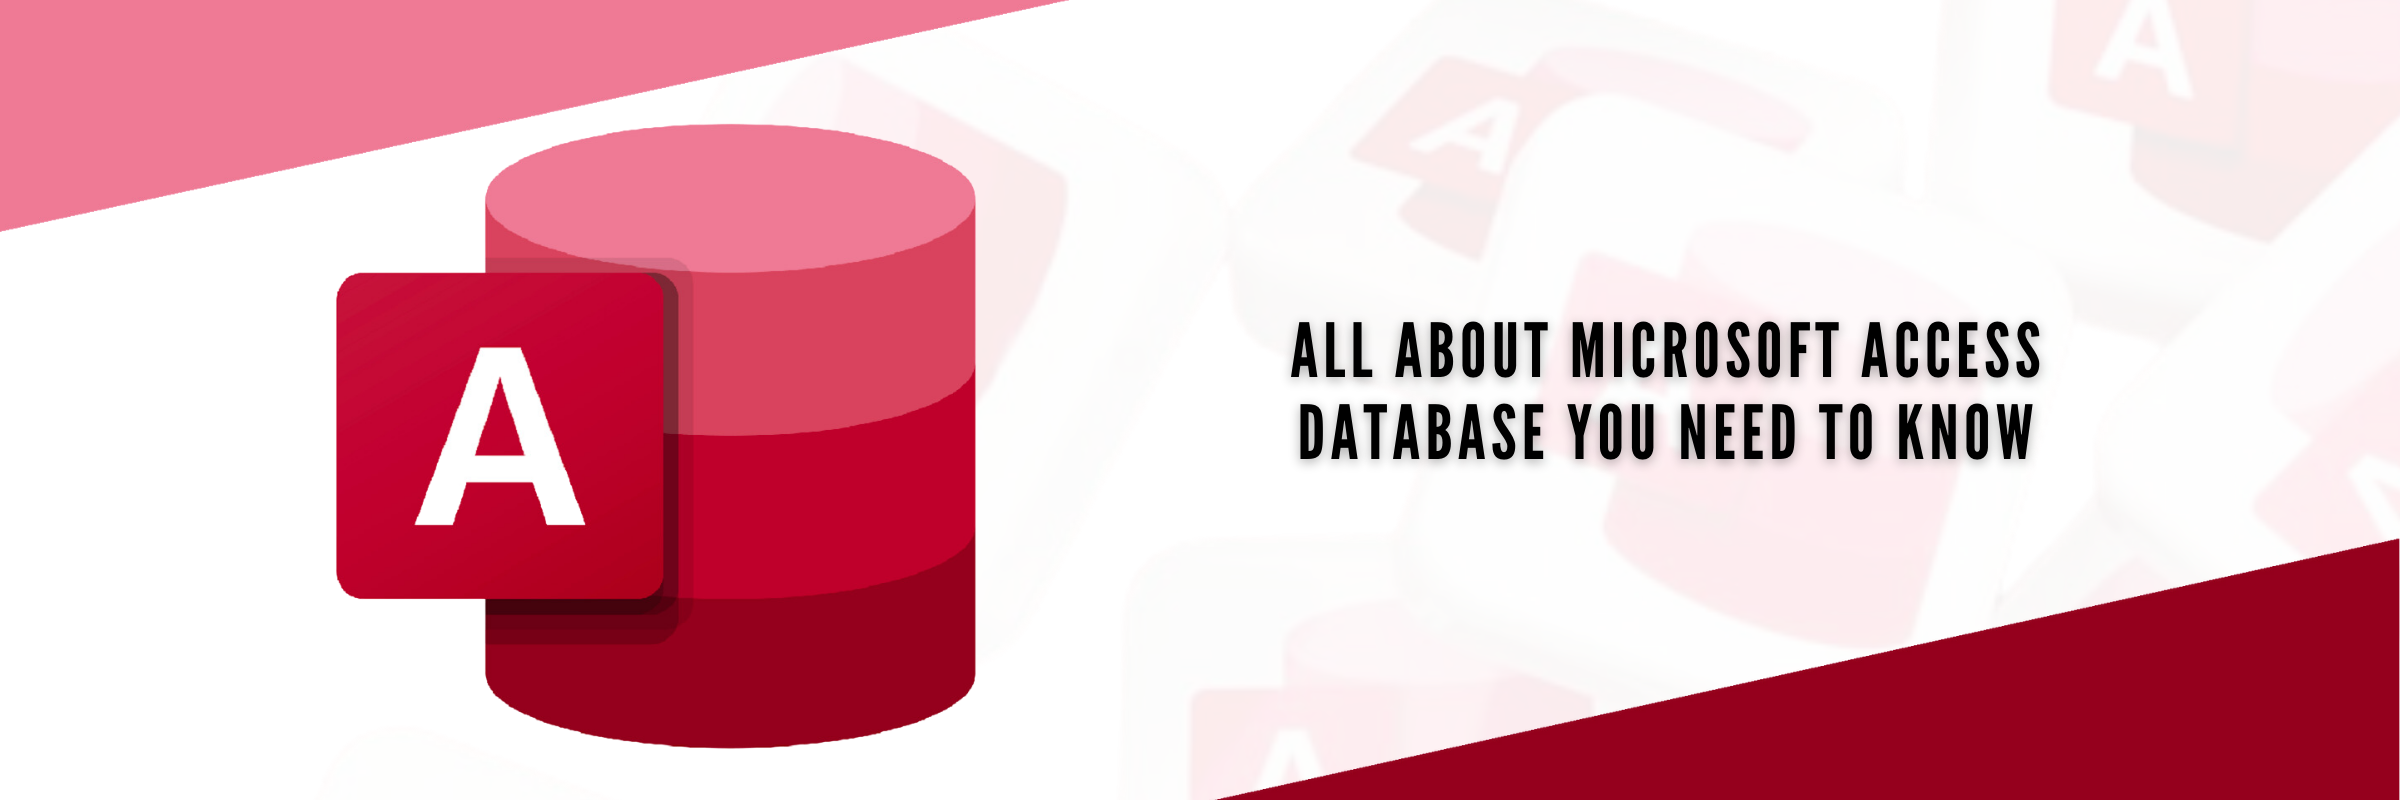 All about Microsoft Access Database you need to know